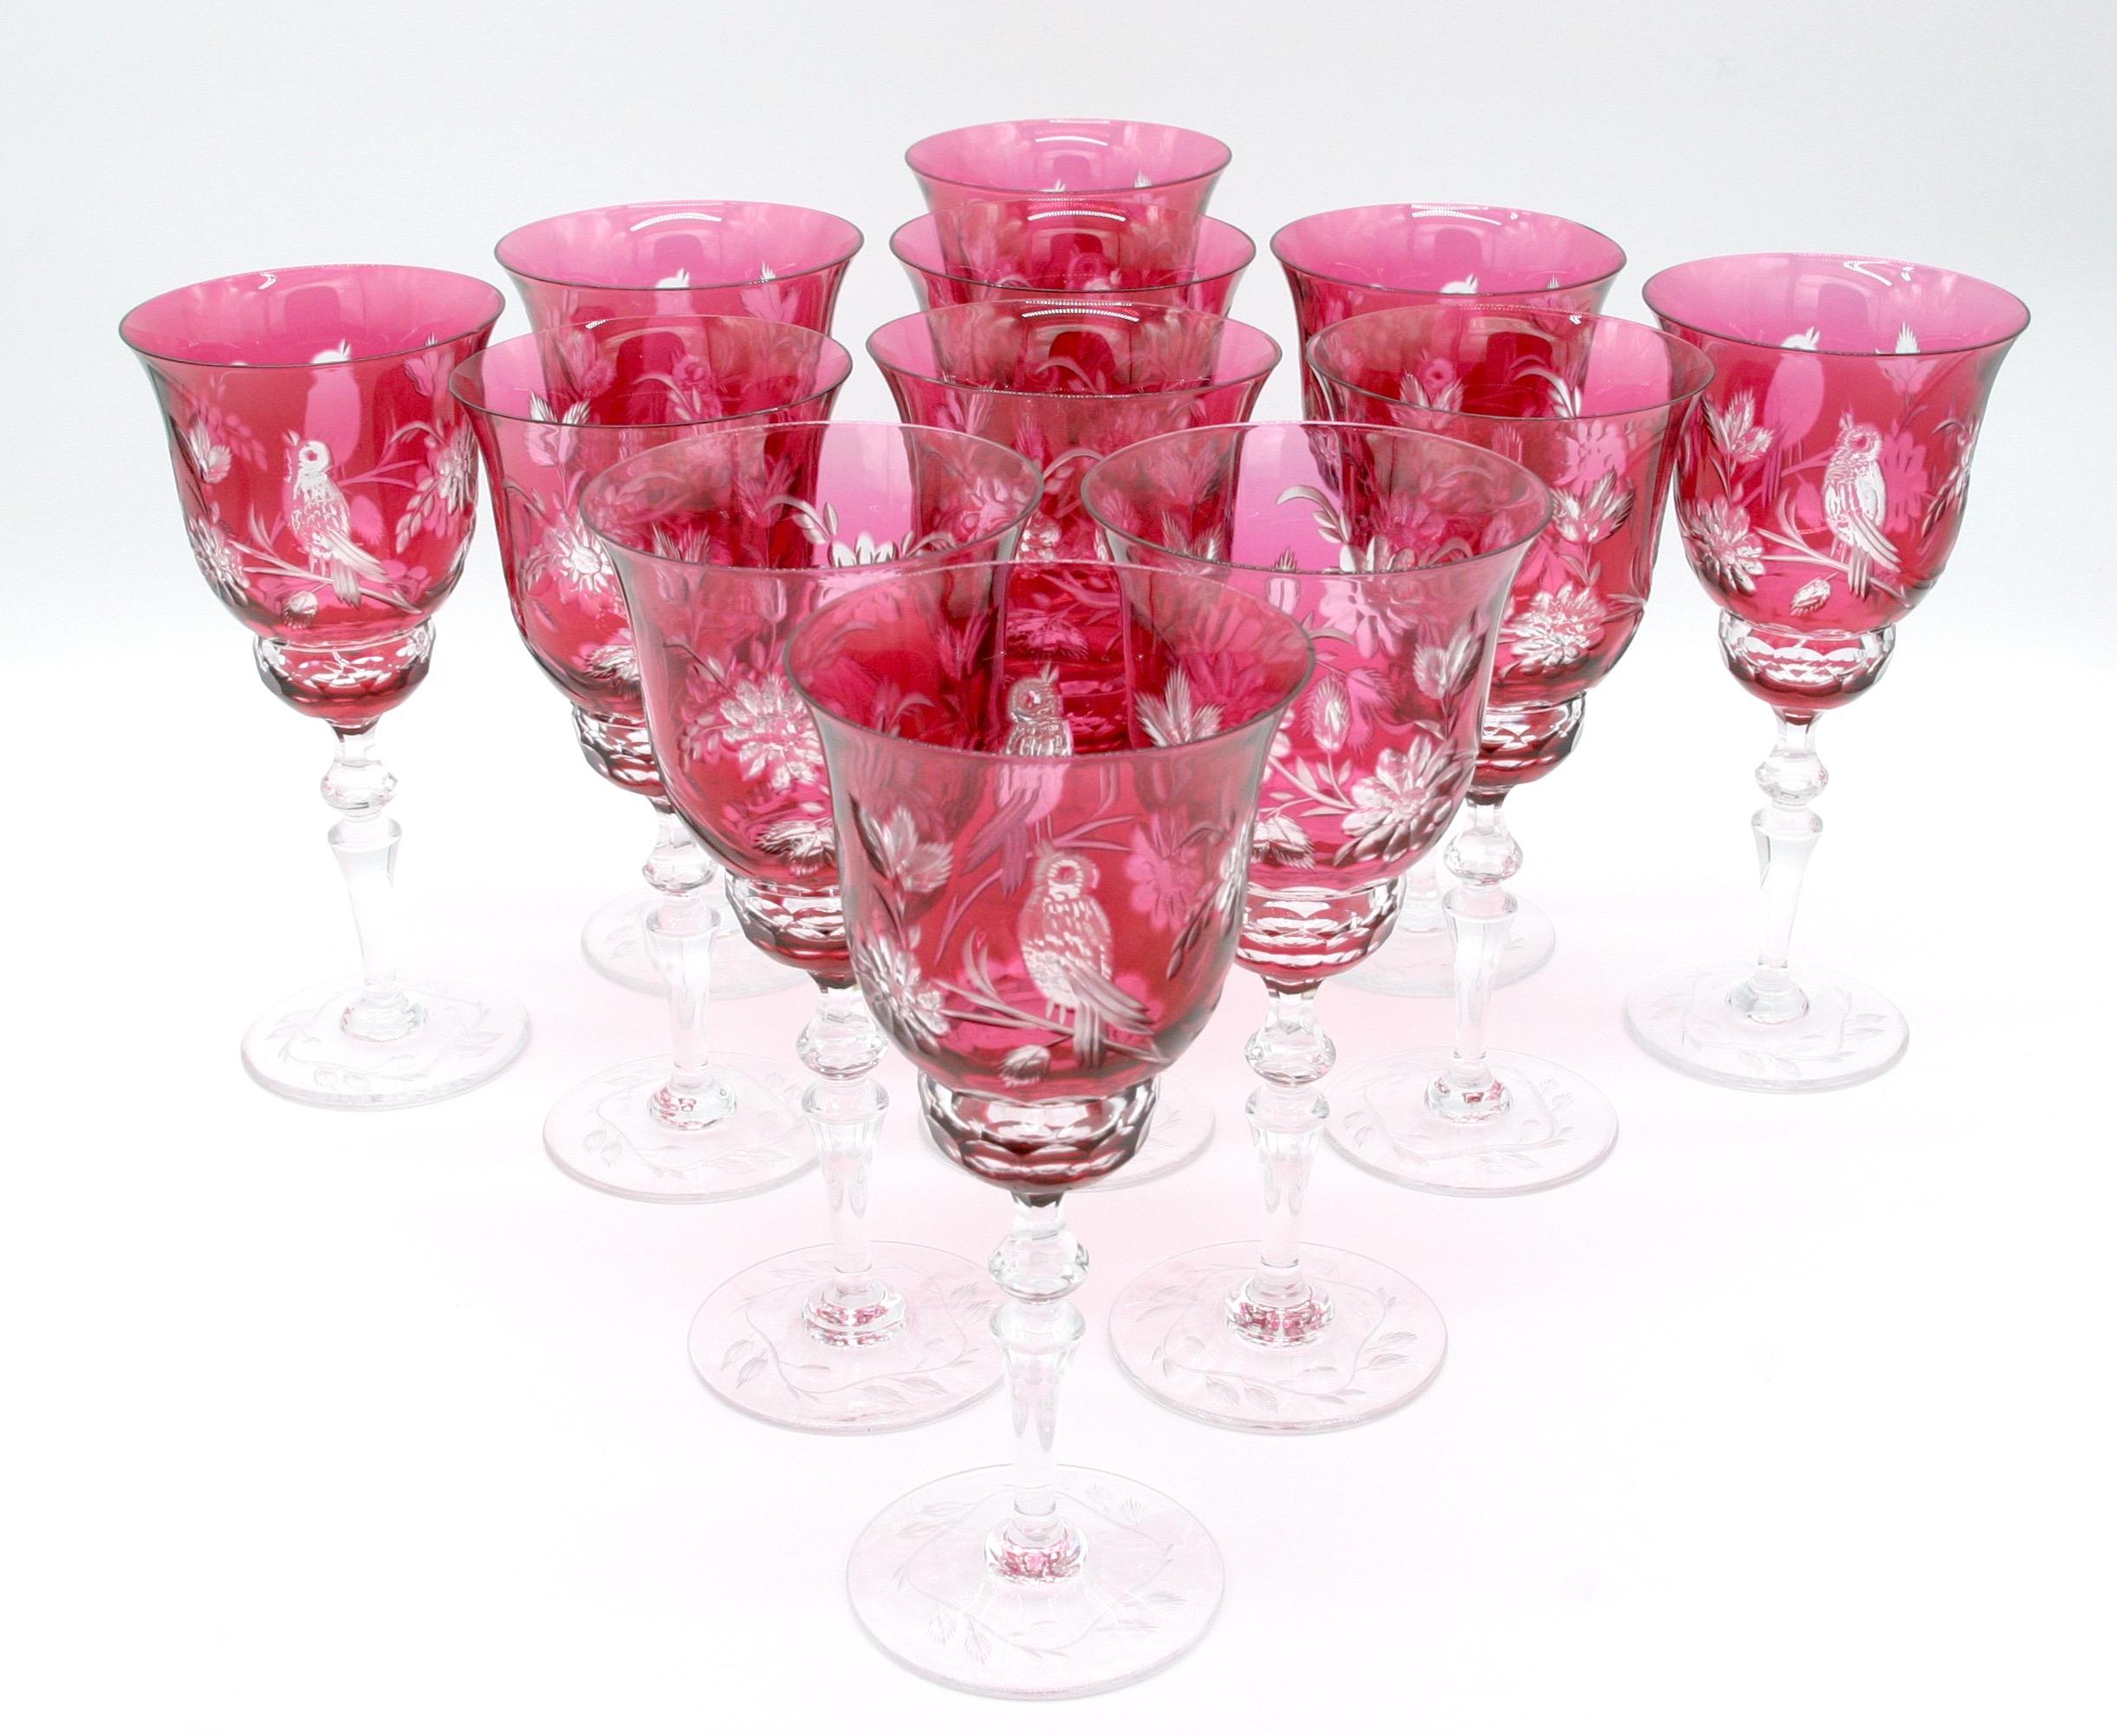 Val Saint Lambert Barware / tableware cranberry crystal service for 12 people . Val crystal is regarded as some of the most magnificent ever made and renowned for their exquisite color. This specific pattern, a variant of their renowned 